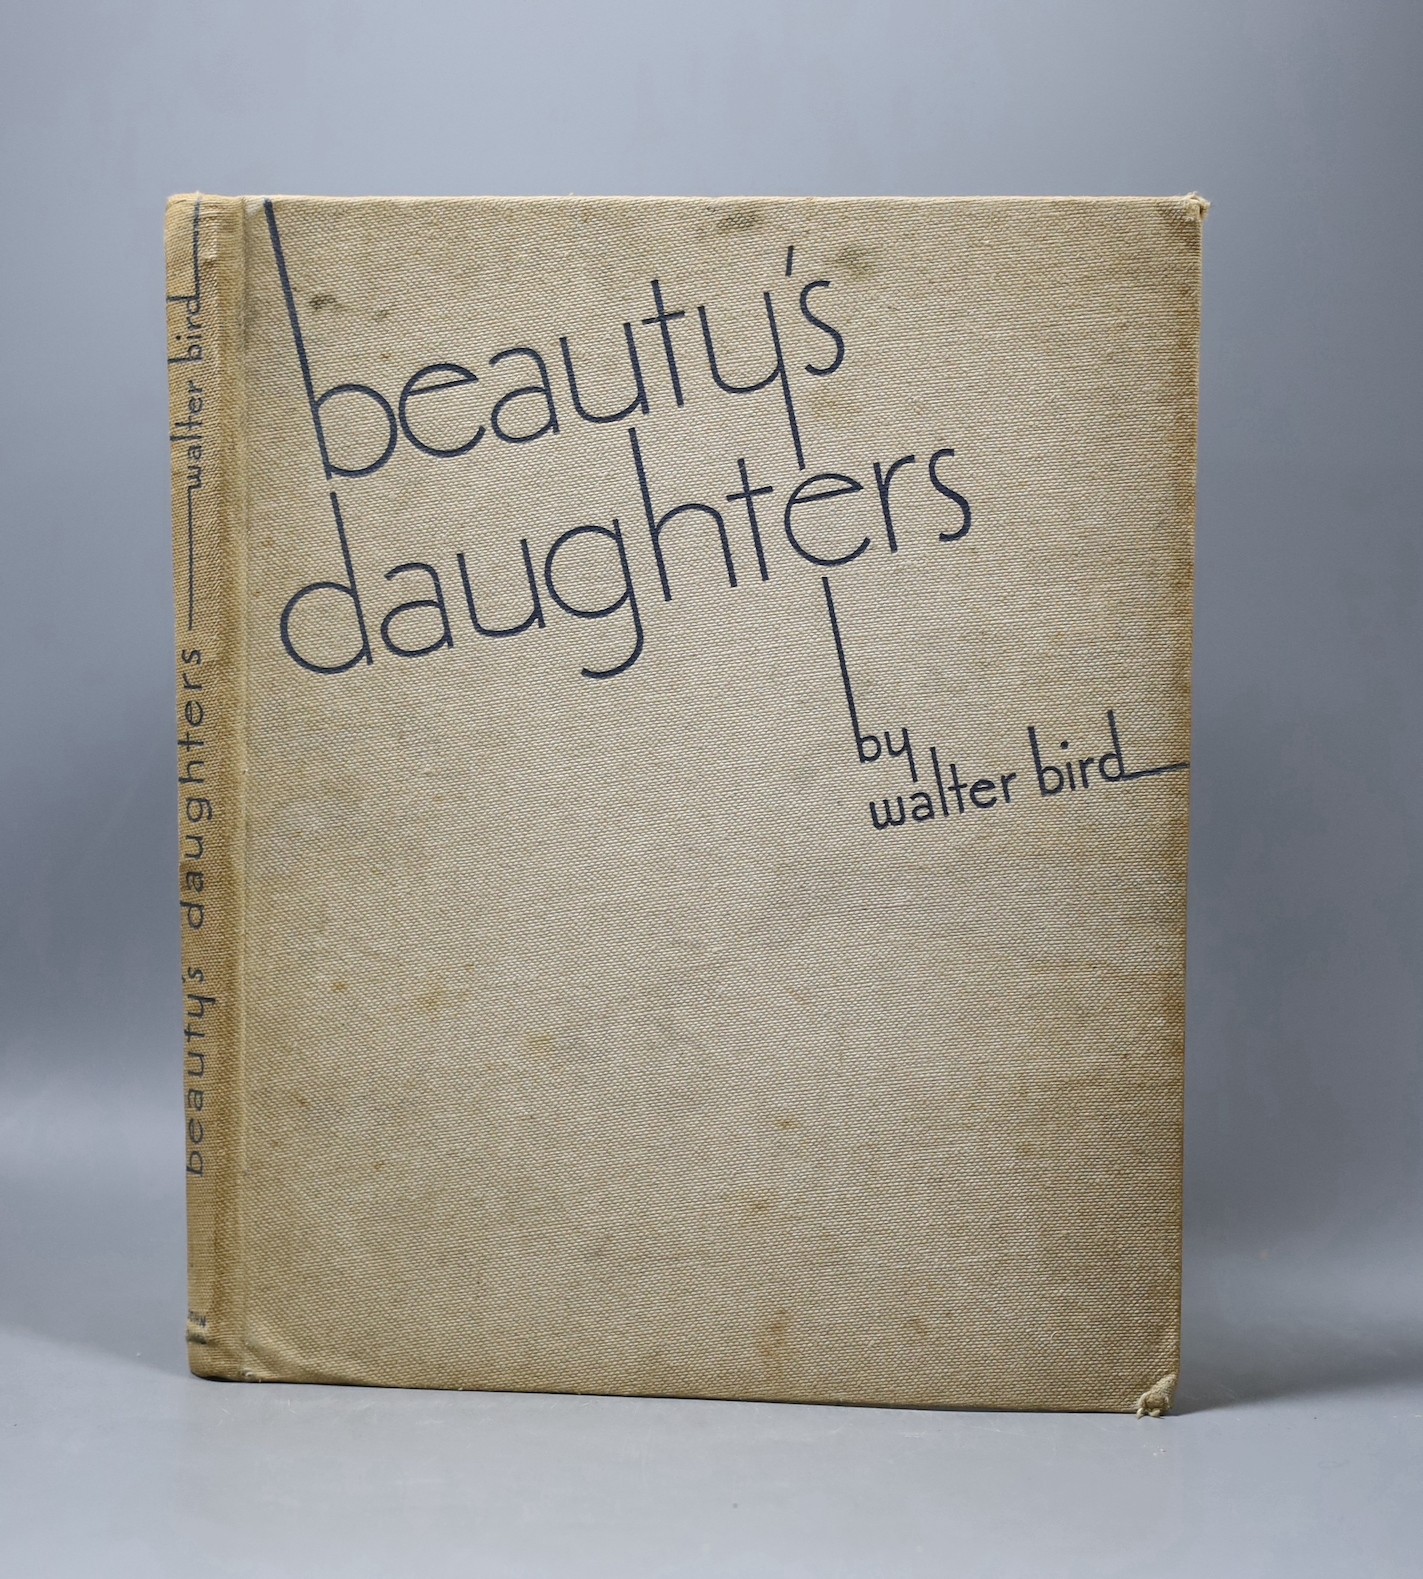 Walter Bird, Beauty's daughters, first edition, 1938